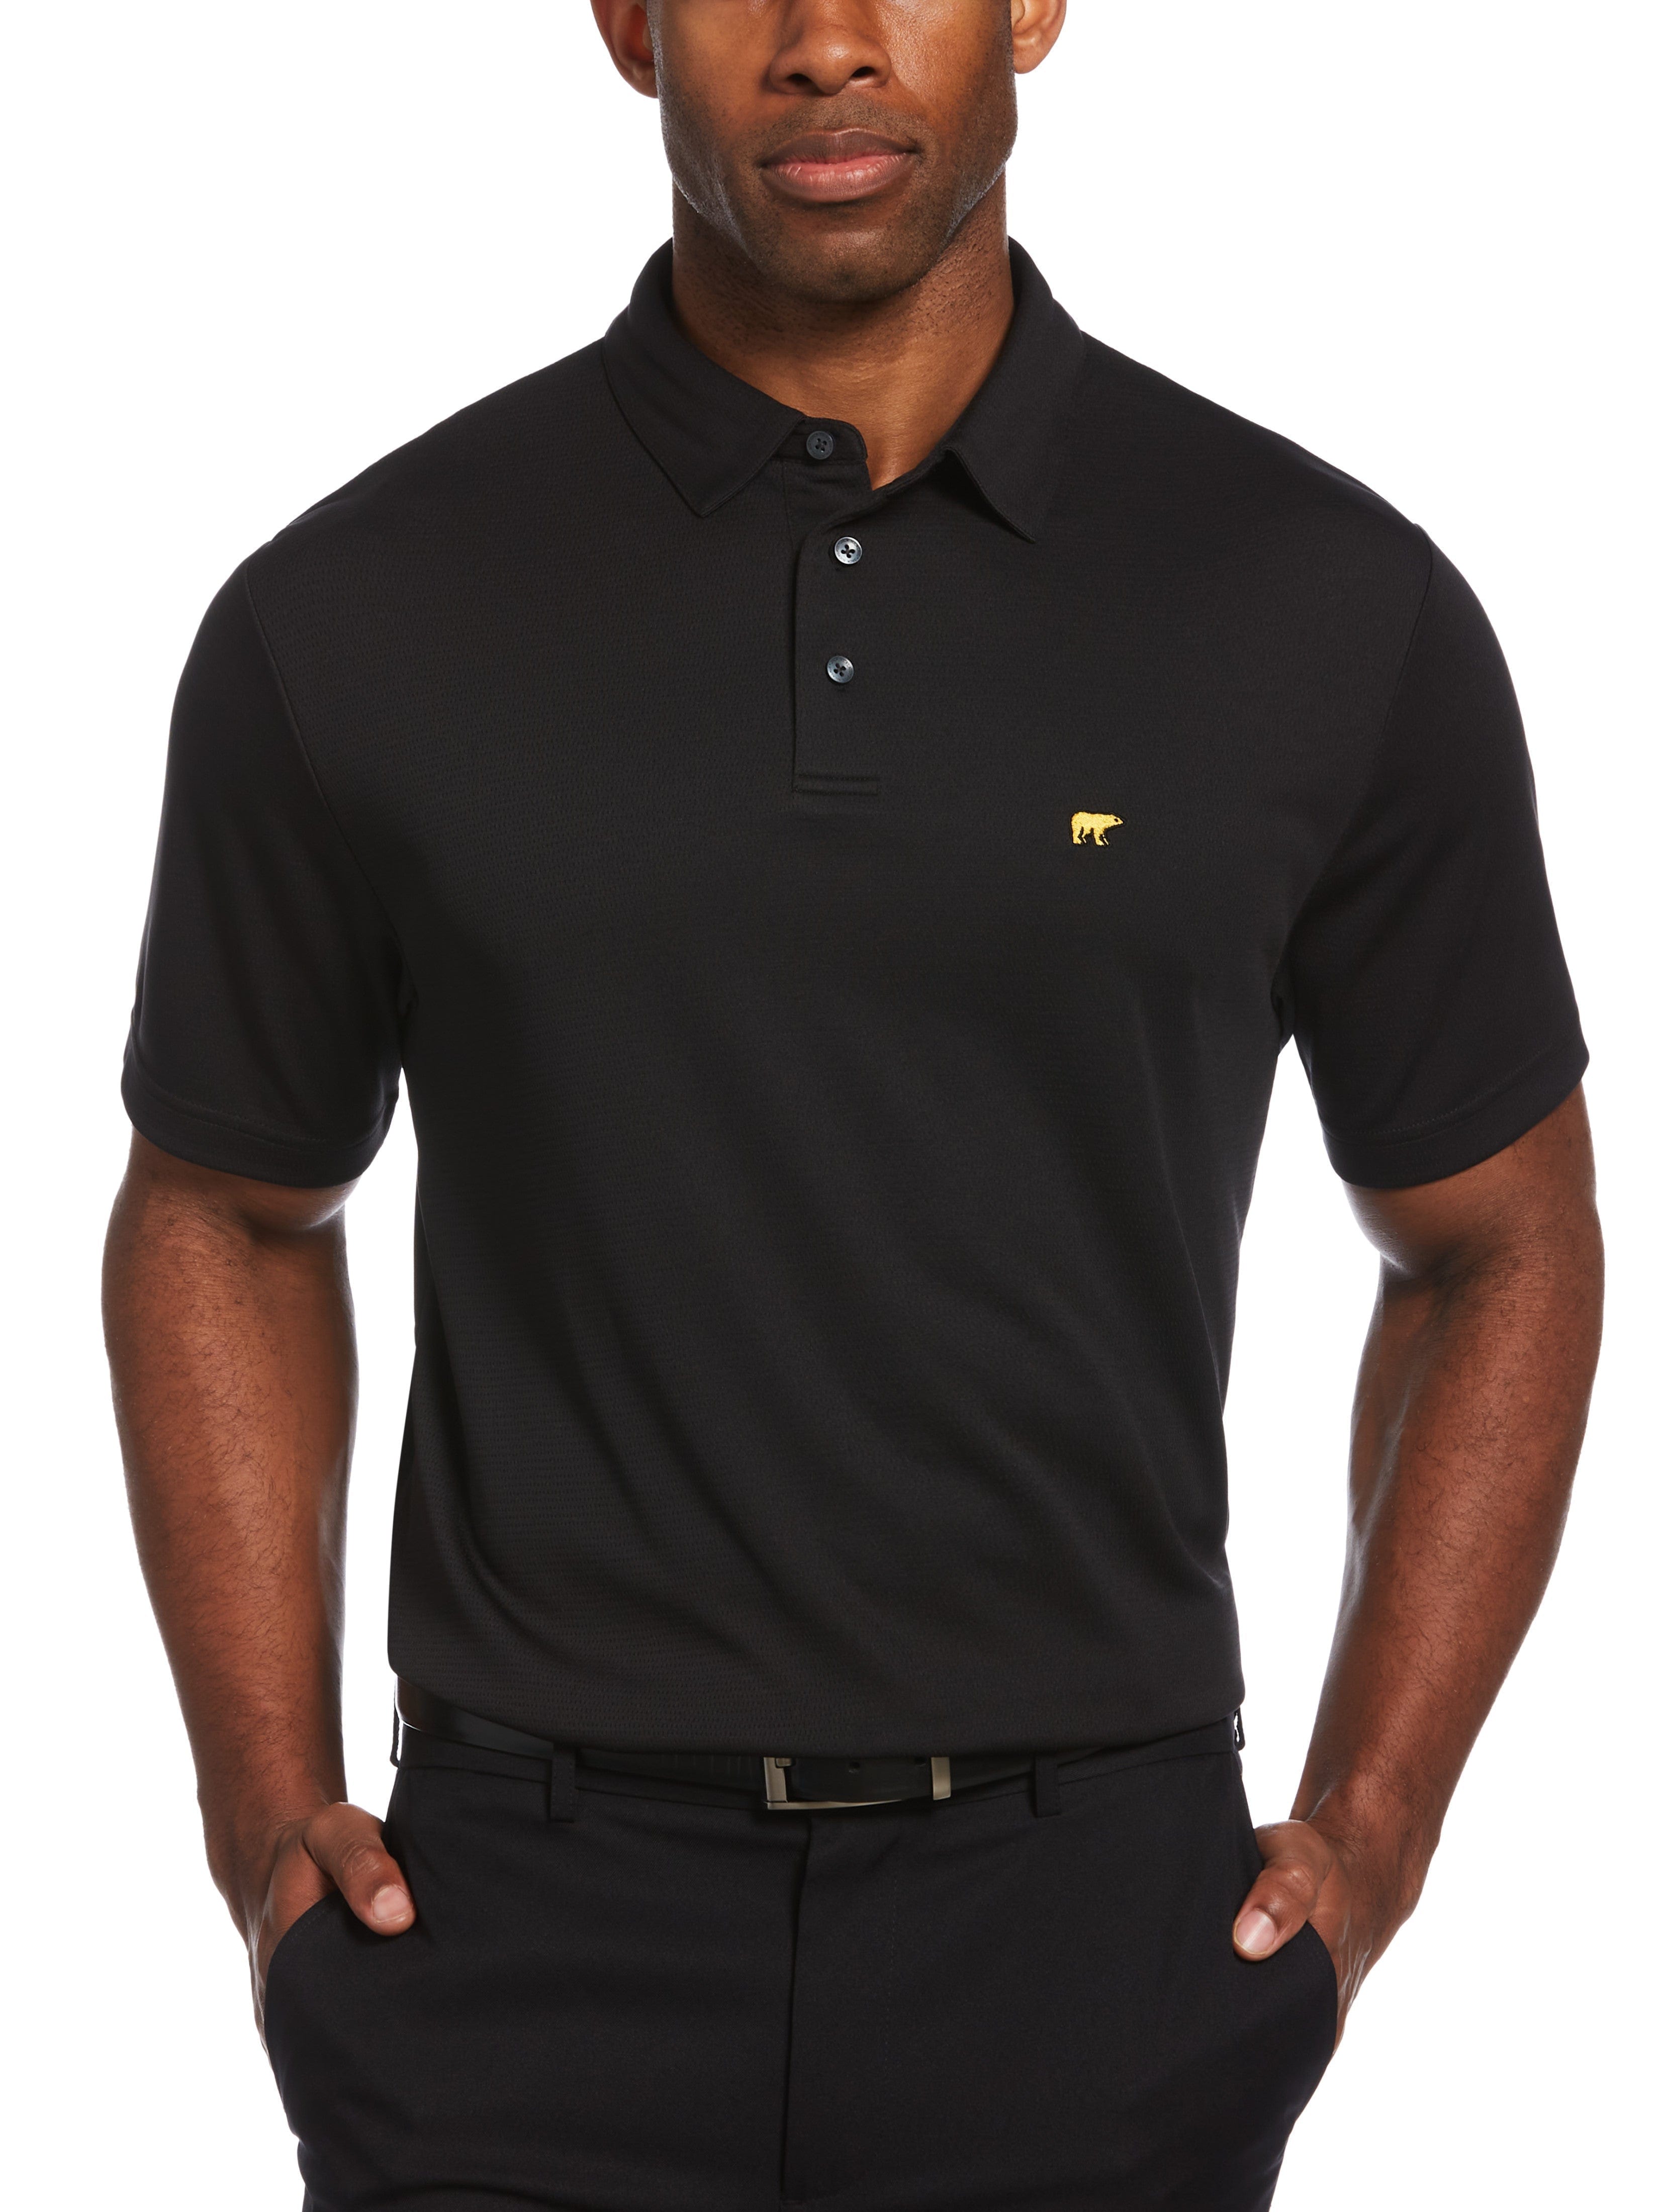 Jack Nicklaus Mens Solid Textured Golf Polo Shirt, Size 3XL, Black, 100% Polyester | Golf Apparel Shop